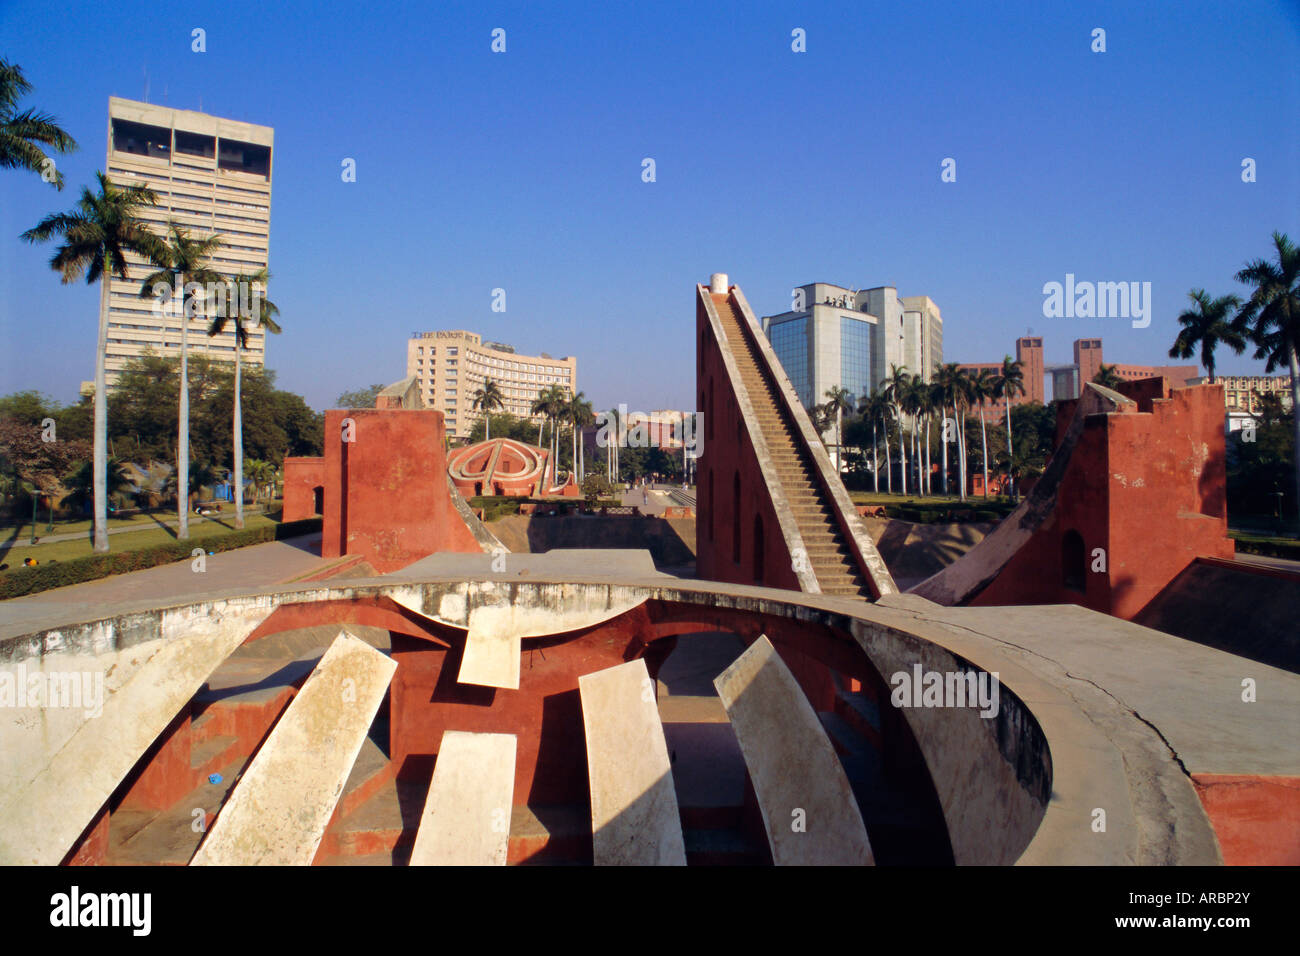 Jantar Mantar, one of five observatories built by Jai Singh II in 1724, Delhi, India Stock Photo